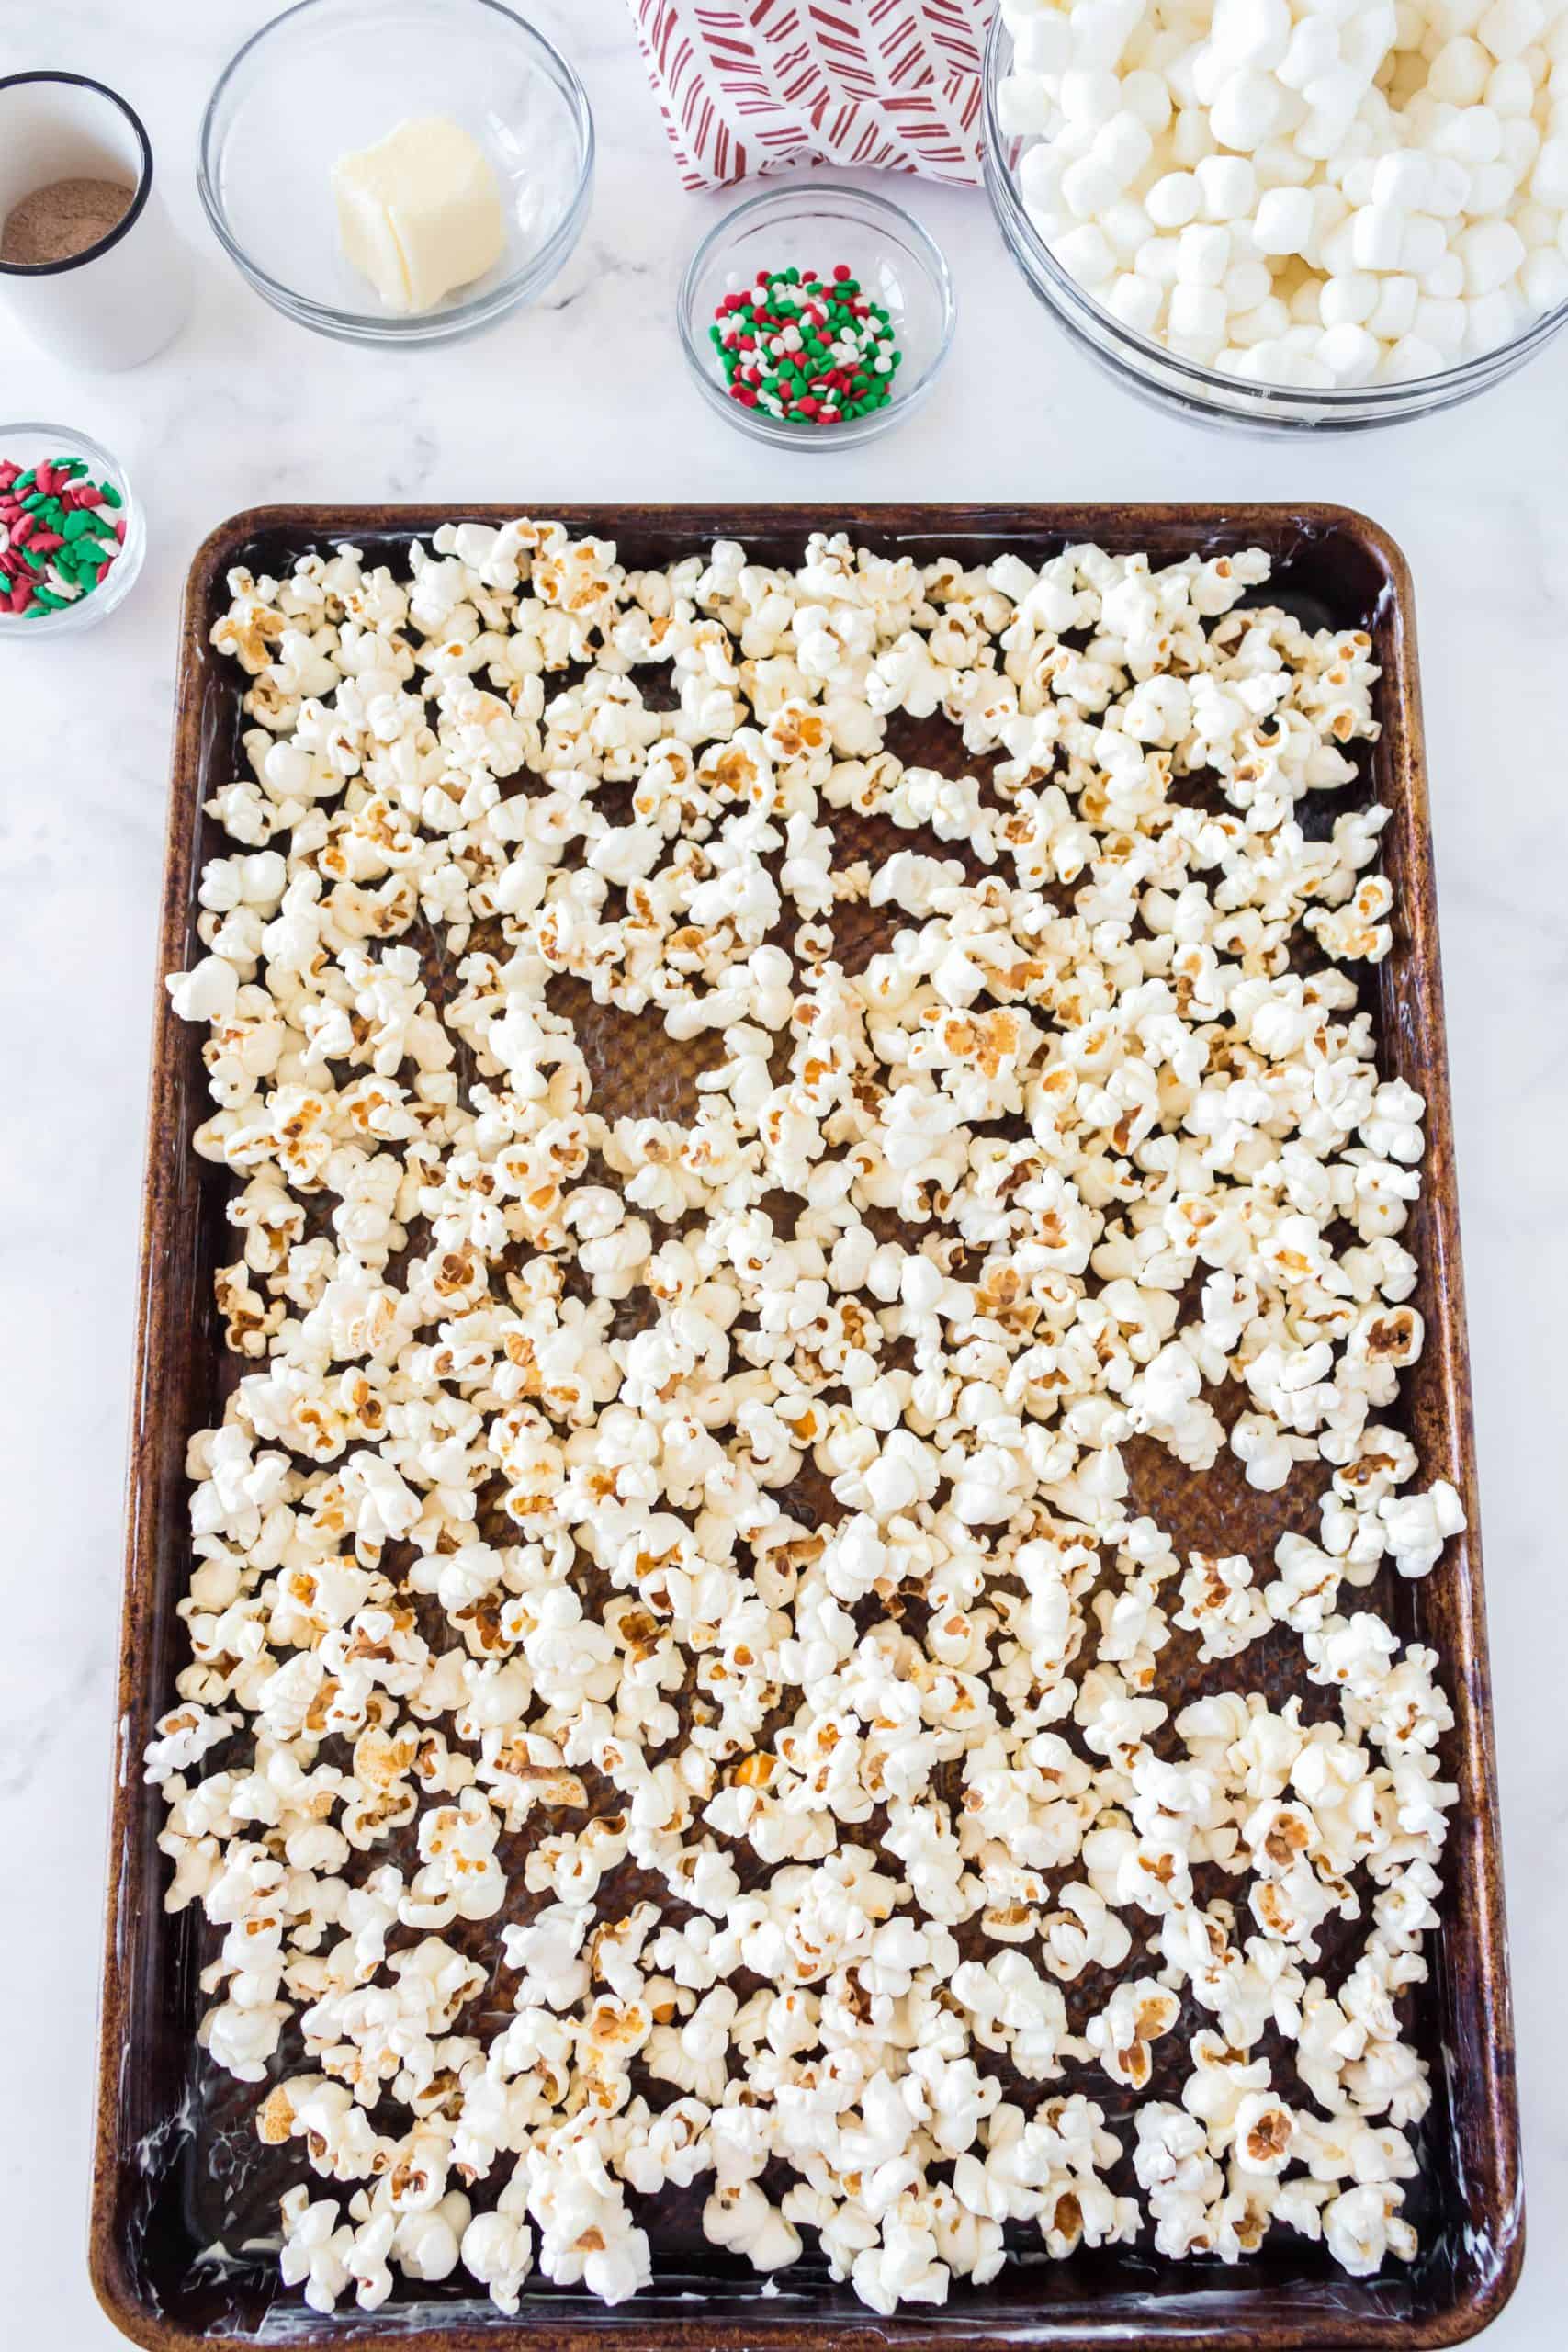 popped popcorn spread out onto butter coated baking sheet.